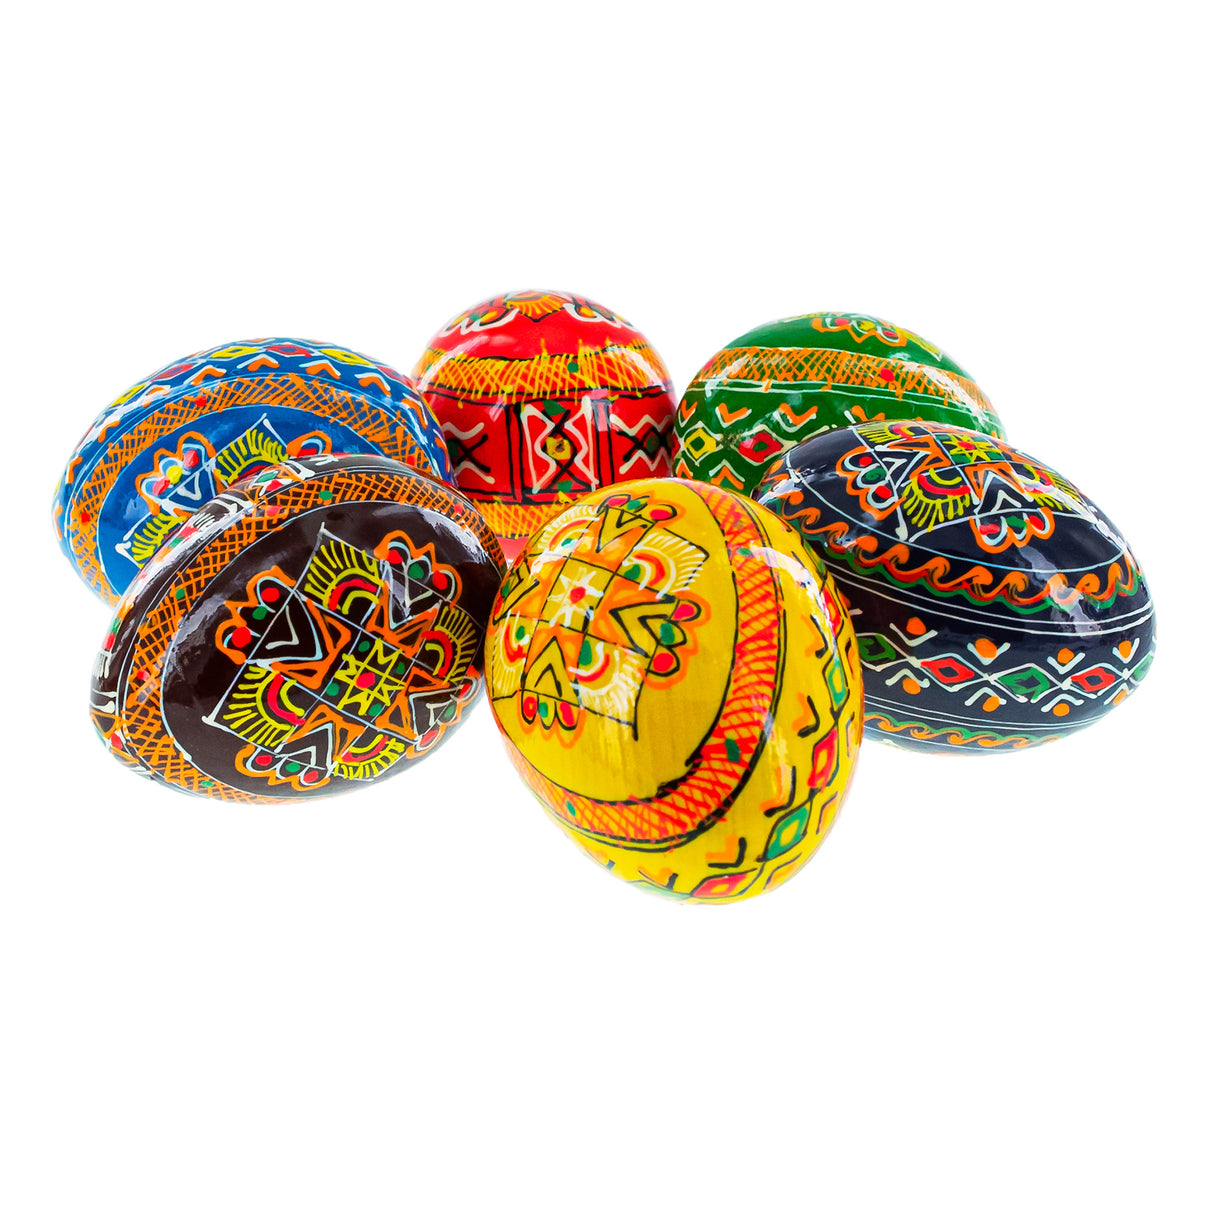 BestPysanky online gift shop sells religious gift Christian Catholic hand painted wood Ukrainian pysanky pysanka designs painting church decorations Easter dyed dying colored decorated Ukraine hunt roll decorating basket